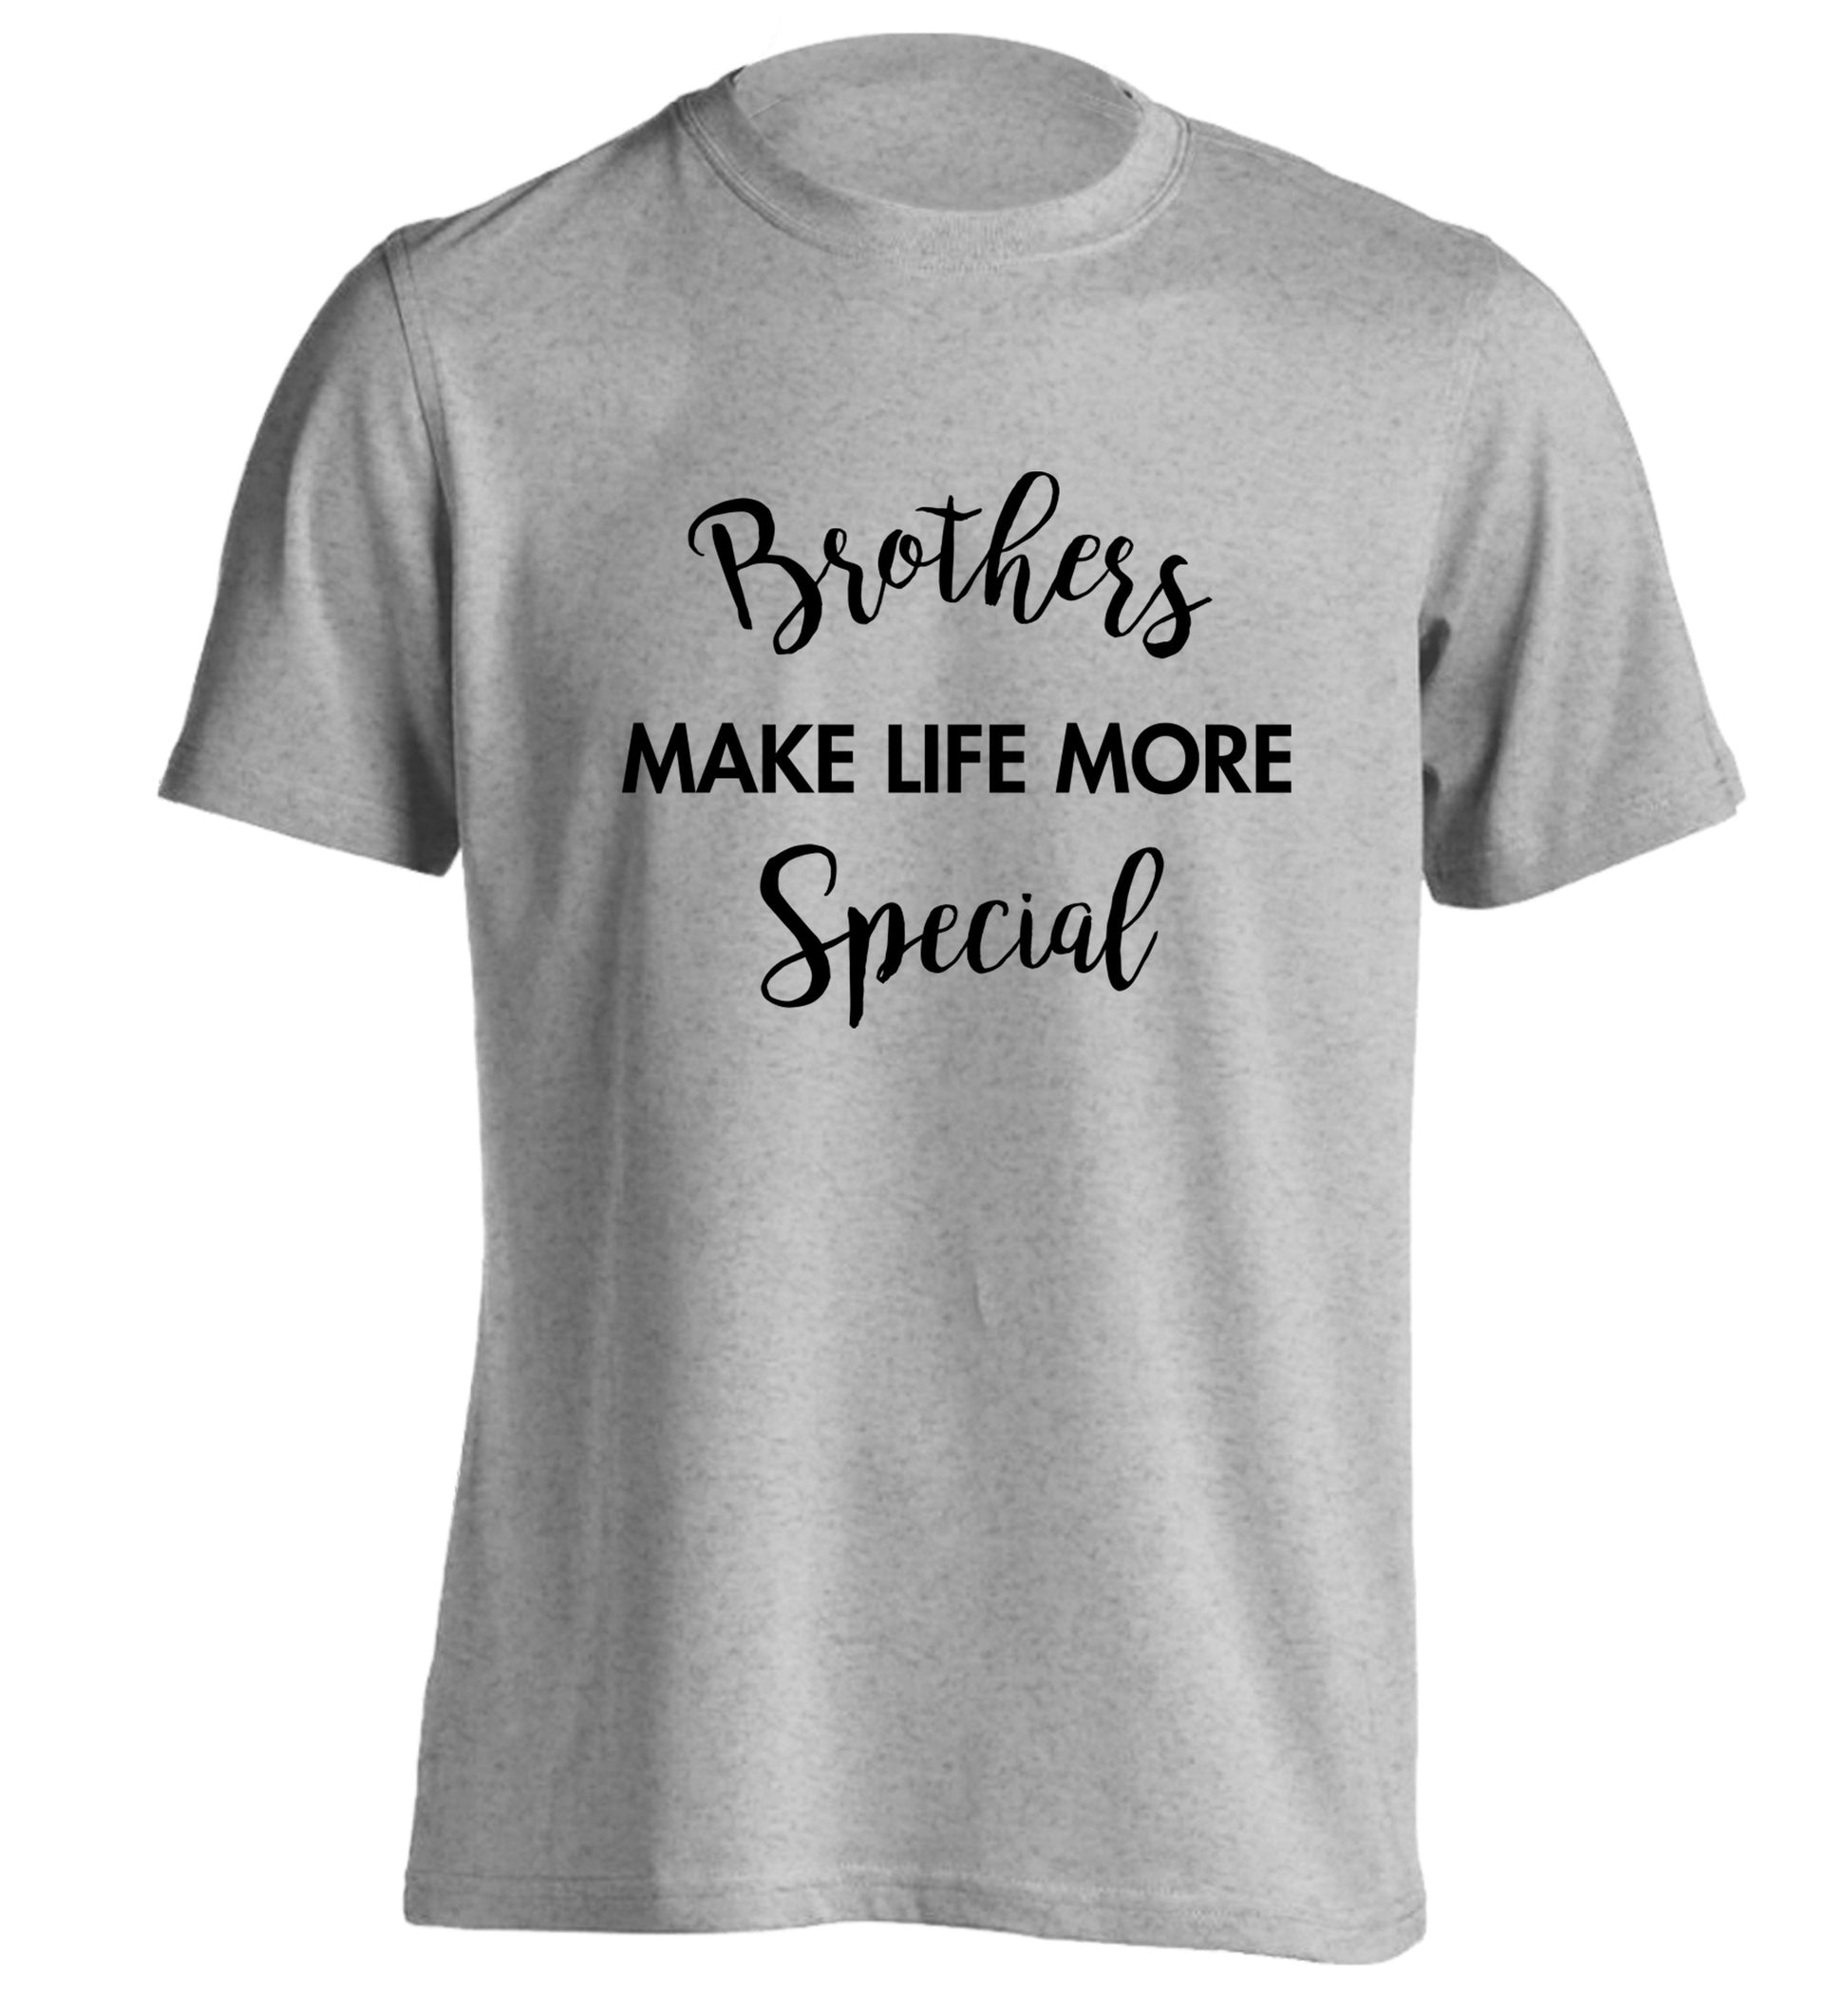 Brothers make life more special adults unisex grey Tshirt 2XL